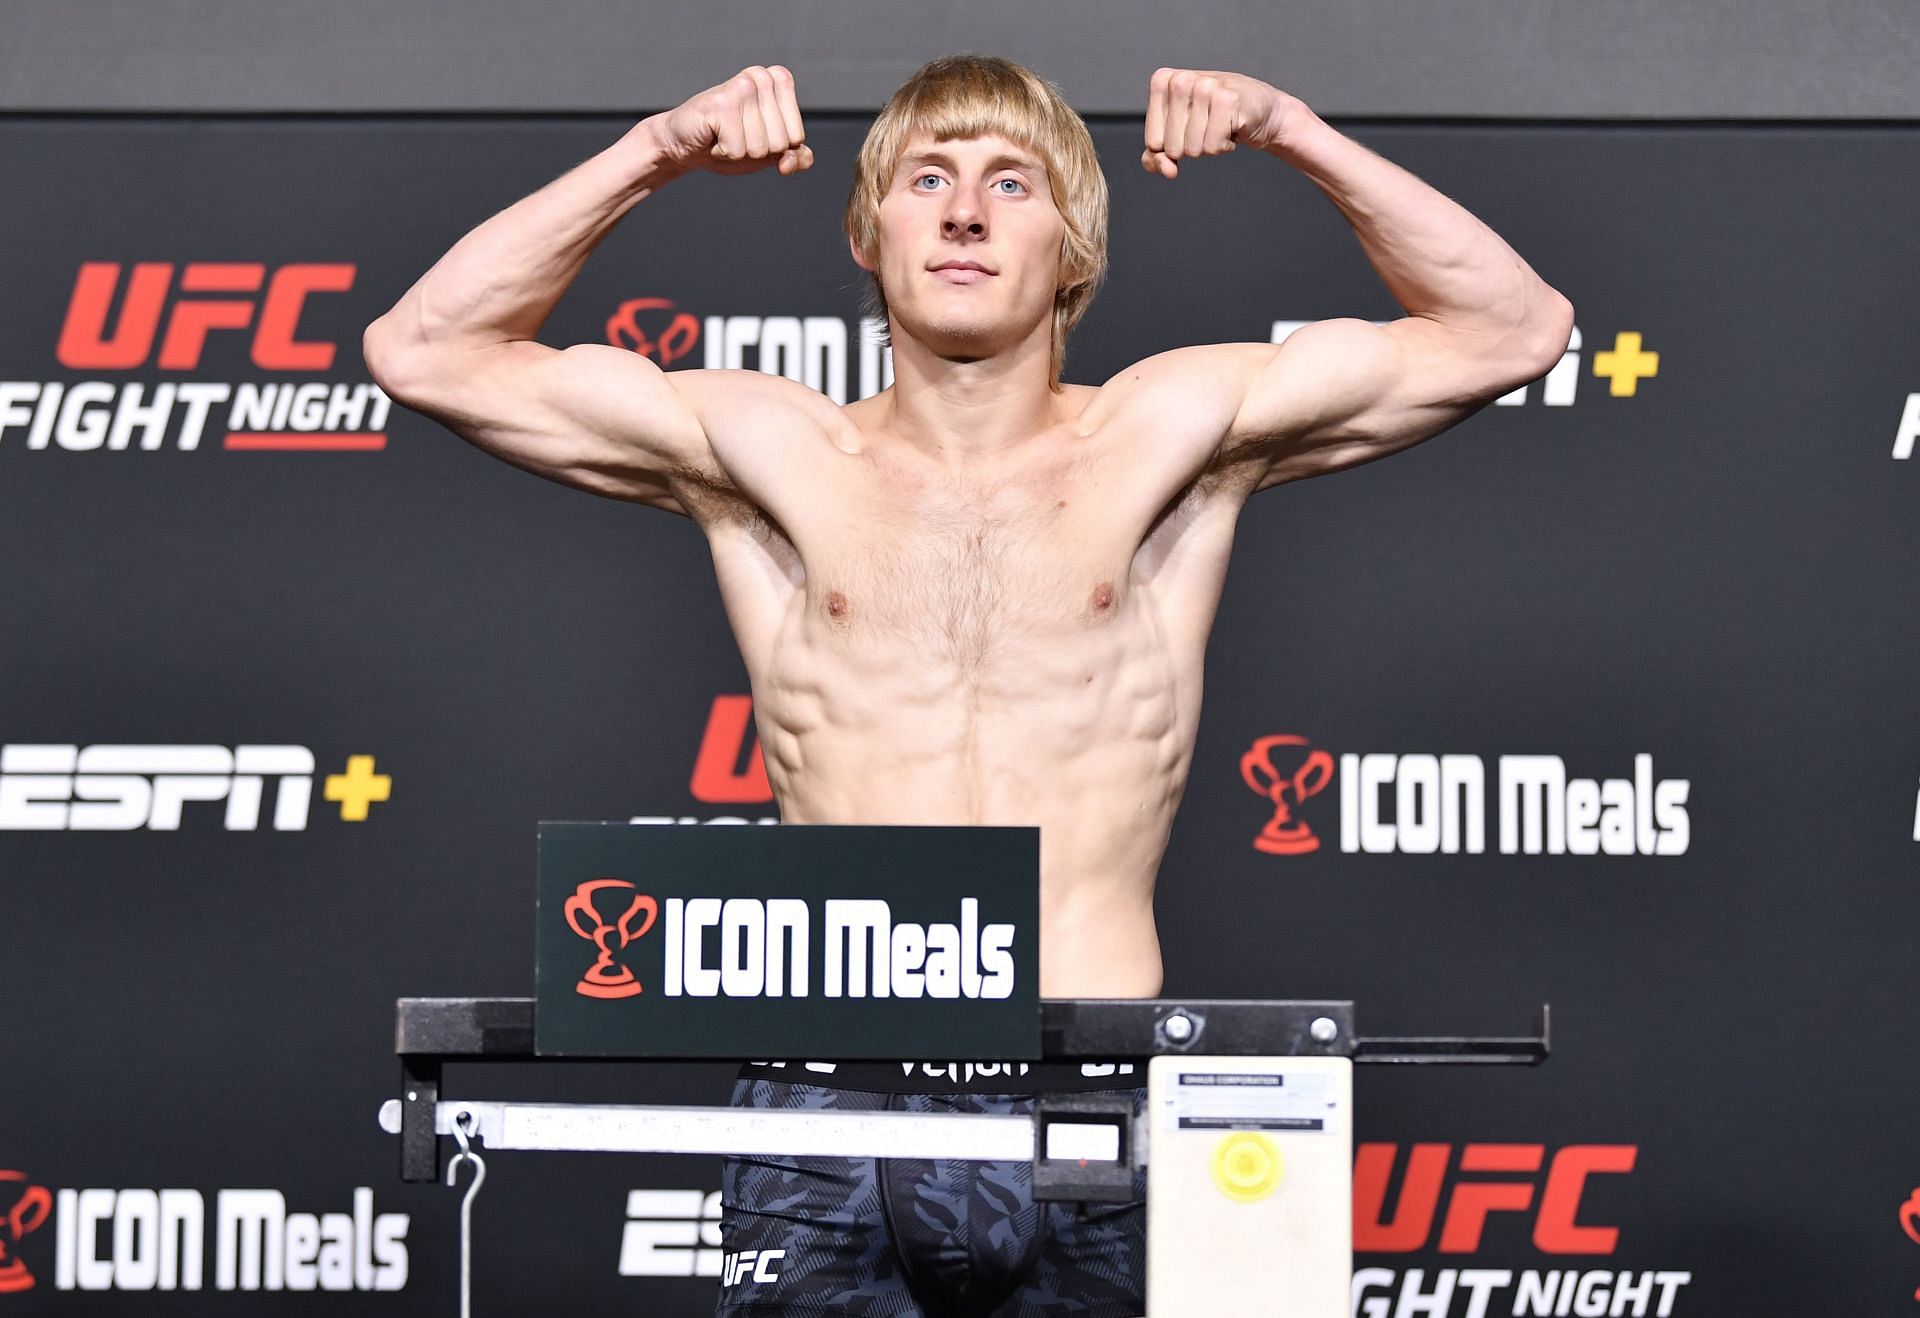 UFC Fight Night: Paddy Pimblett makes weight for his UFC debut (Image courtesy of Getty)